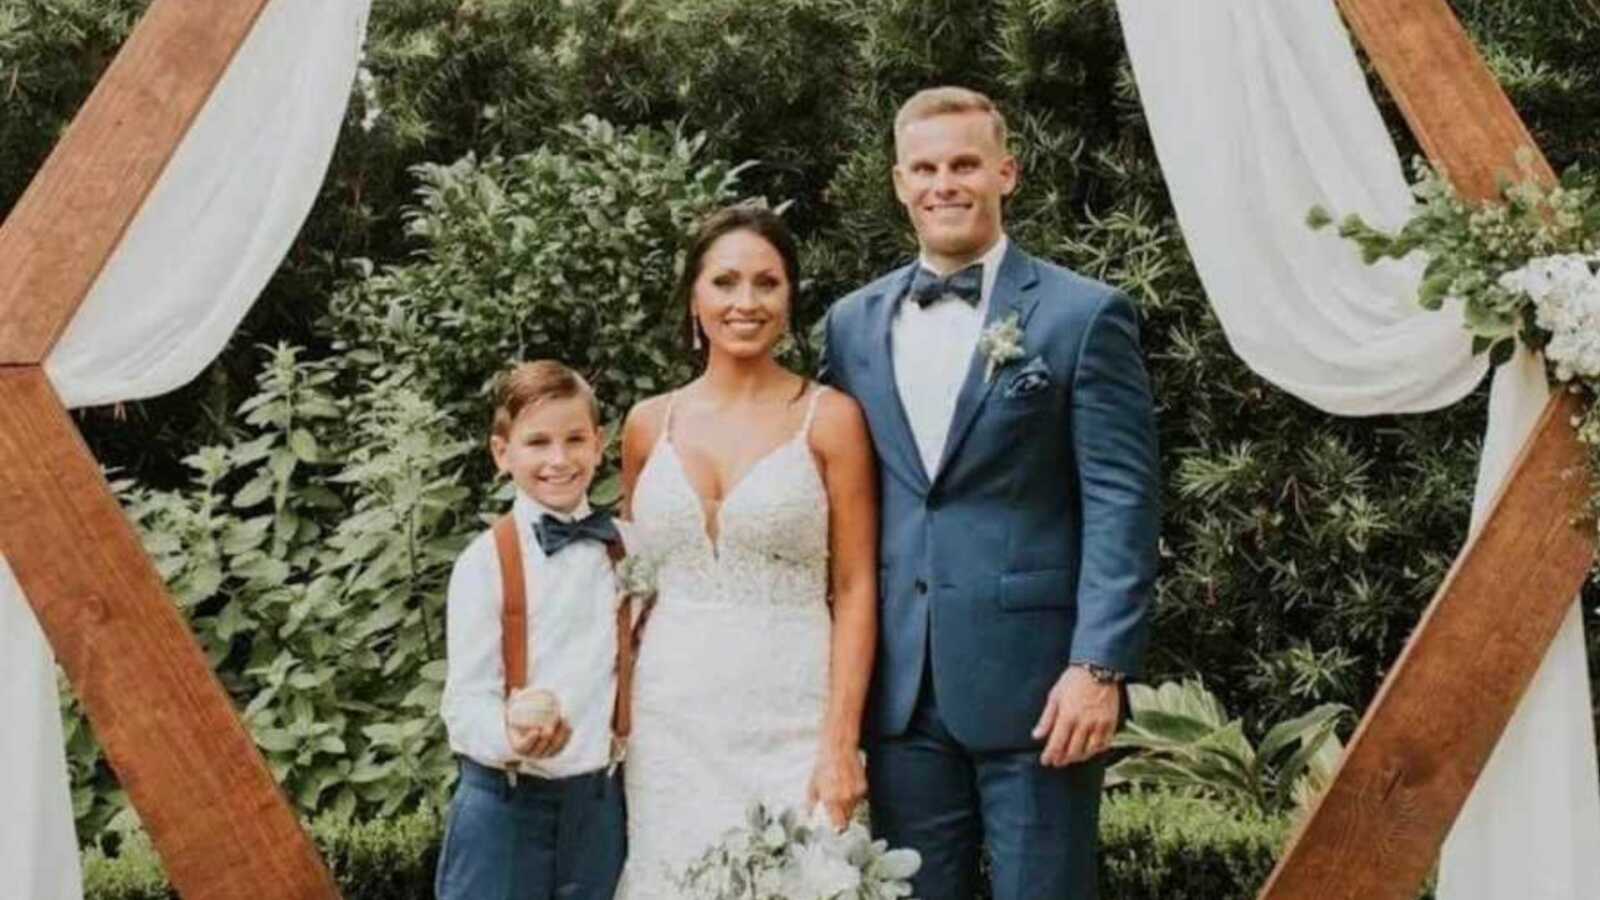 stepdad with new wife and stepson on wedding day